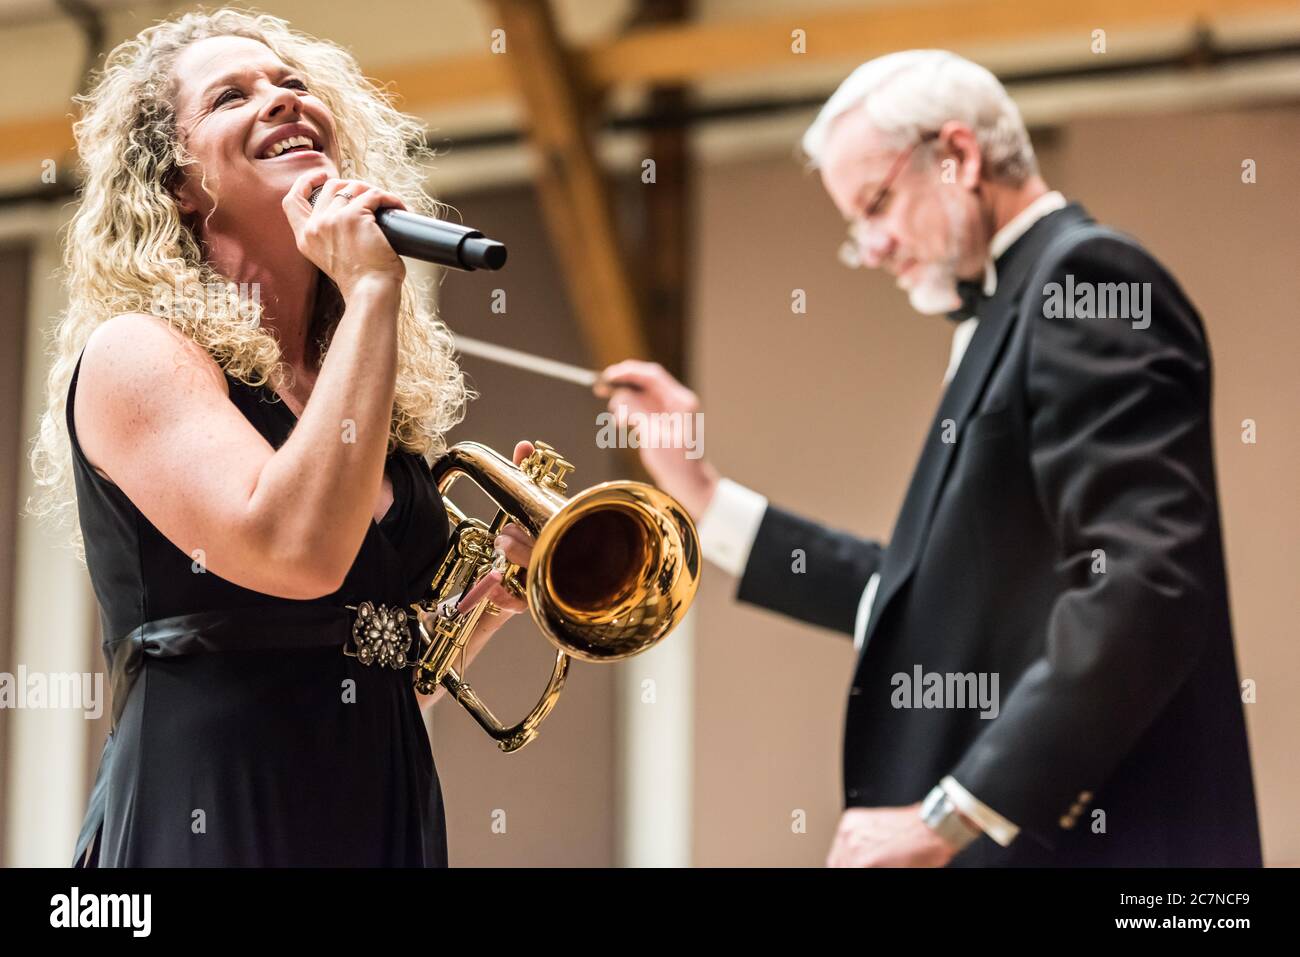 Closeup of Christine Fawson singing with The Concord Band. Stock Photo